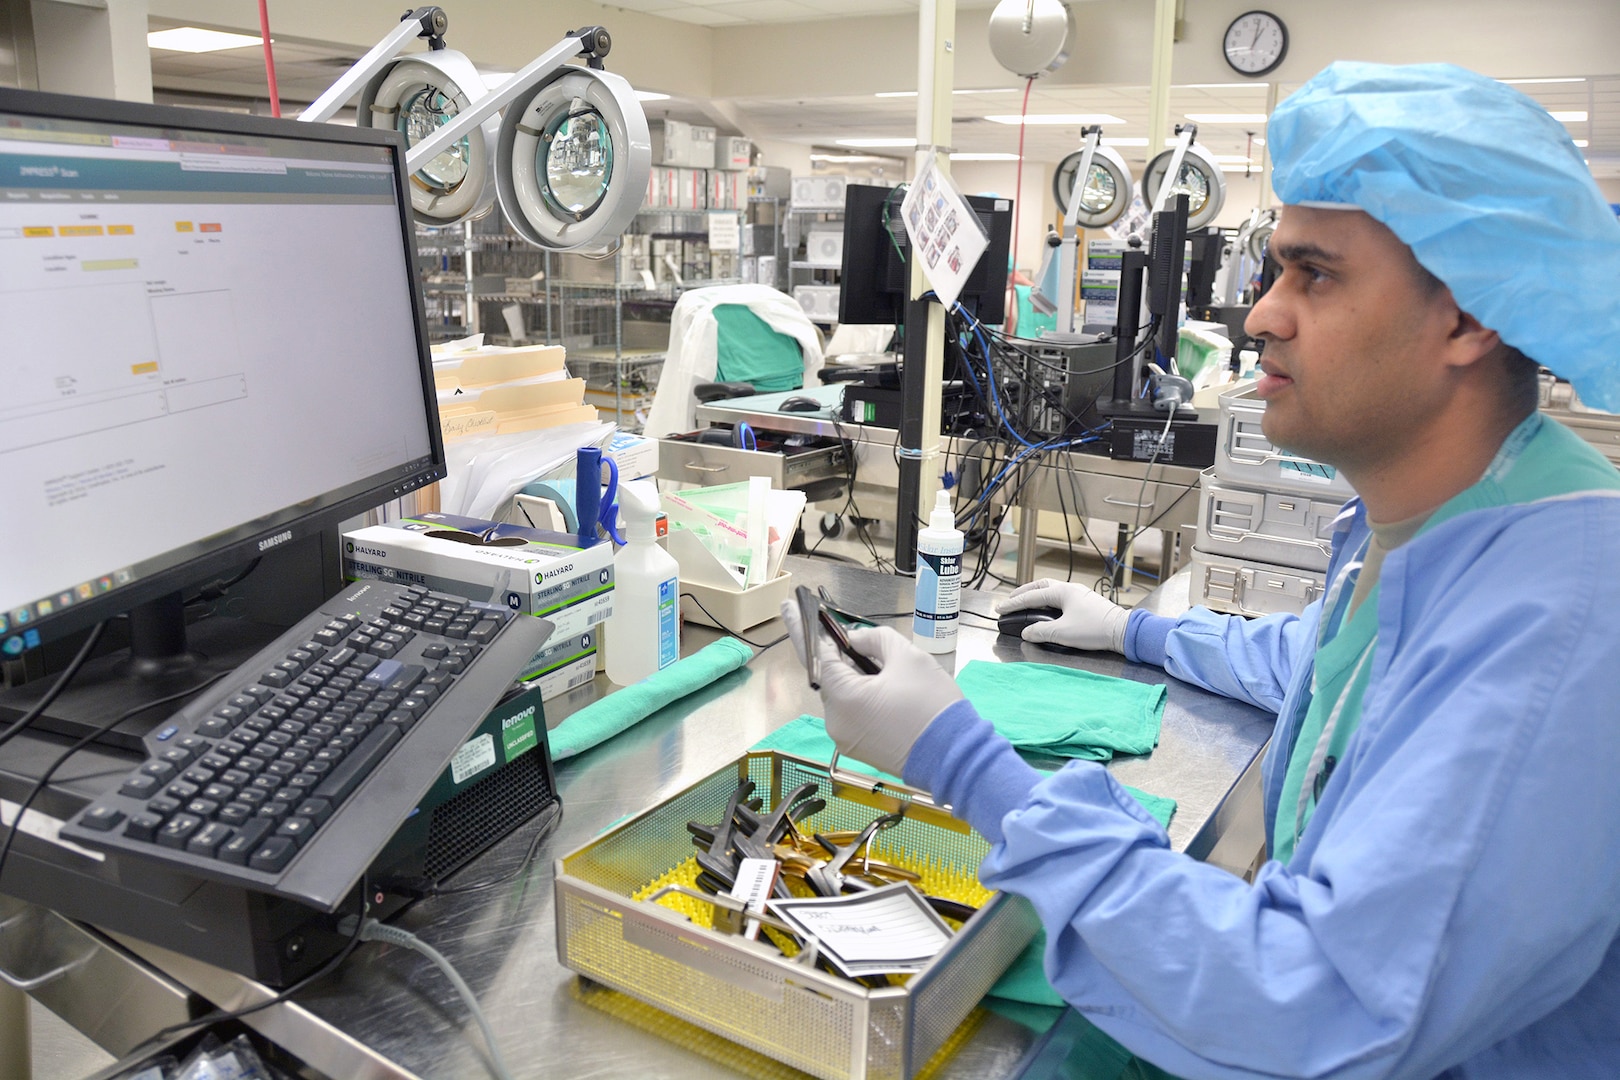 Spc. Thomas Kaithamattam, BAMC’s Sterile Processing and Distribution division technician, inspects surgical instruments as part of the sterilization process.